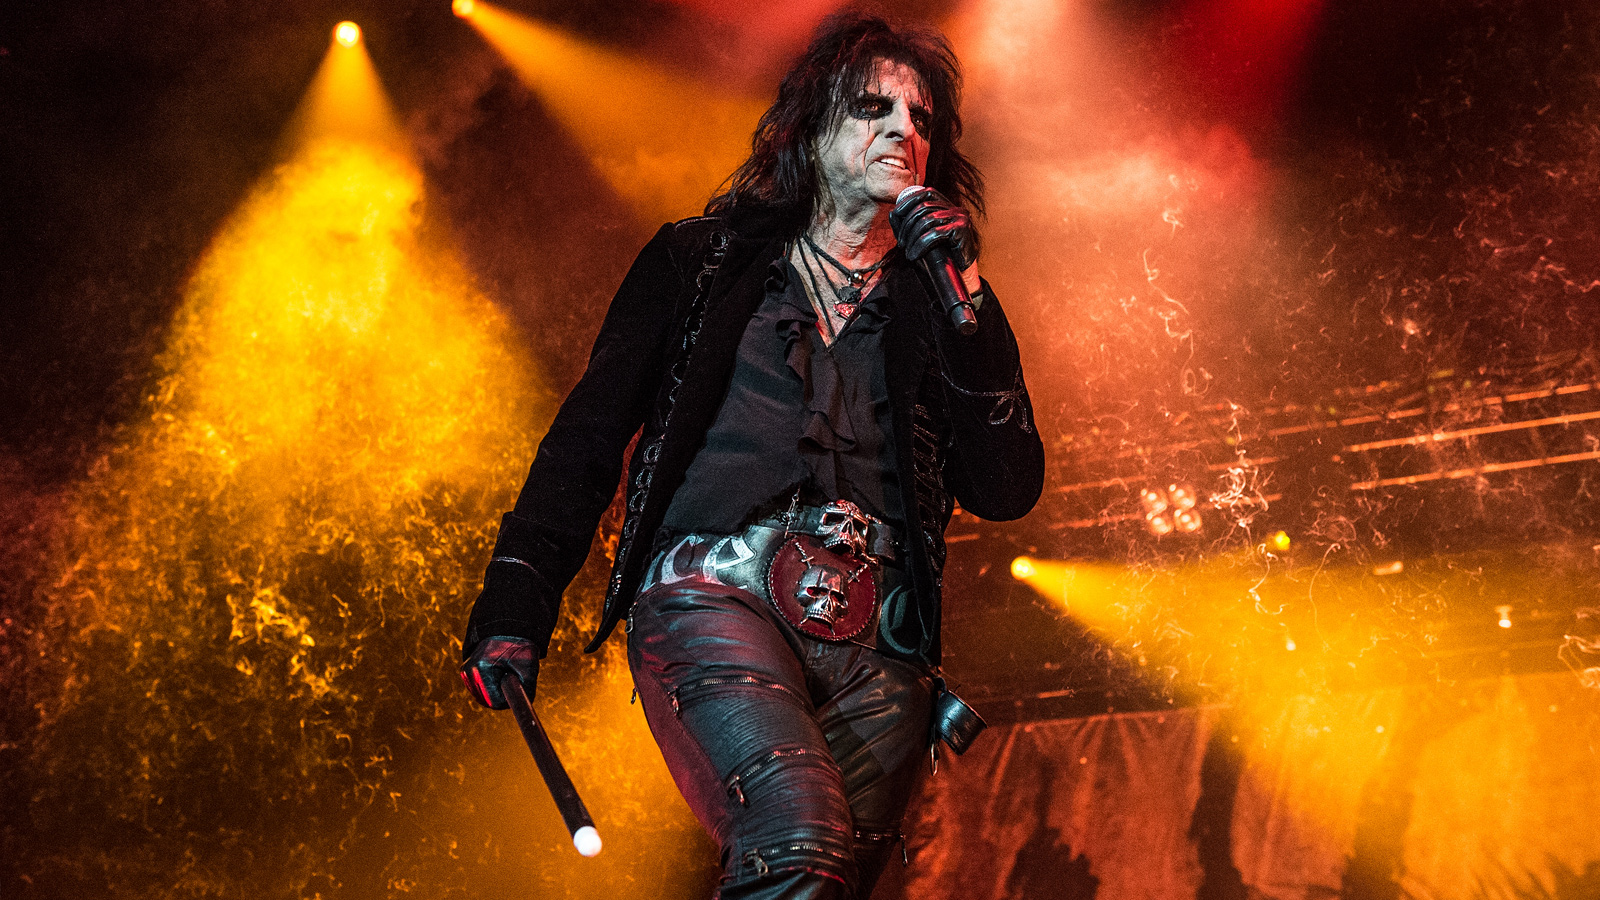 Alice Cooper On Being A Rock 